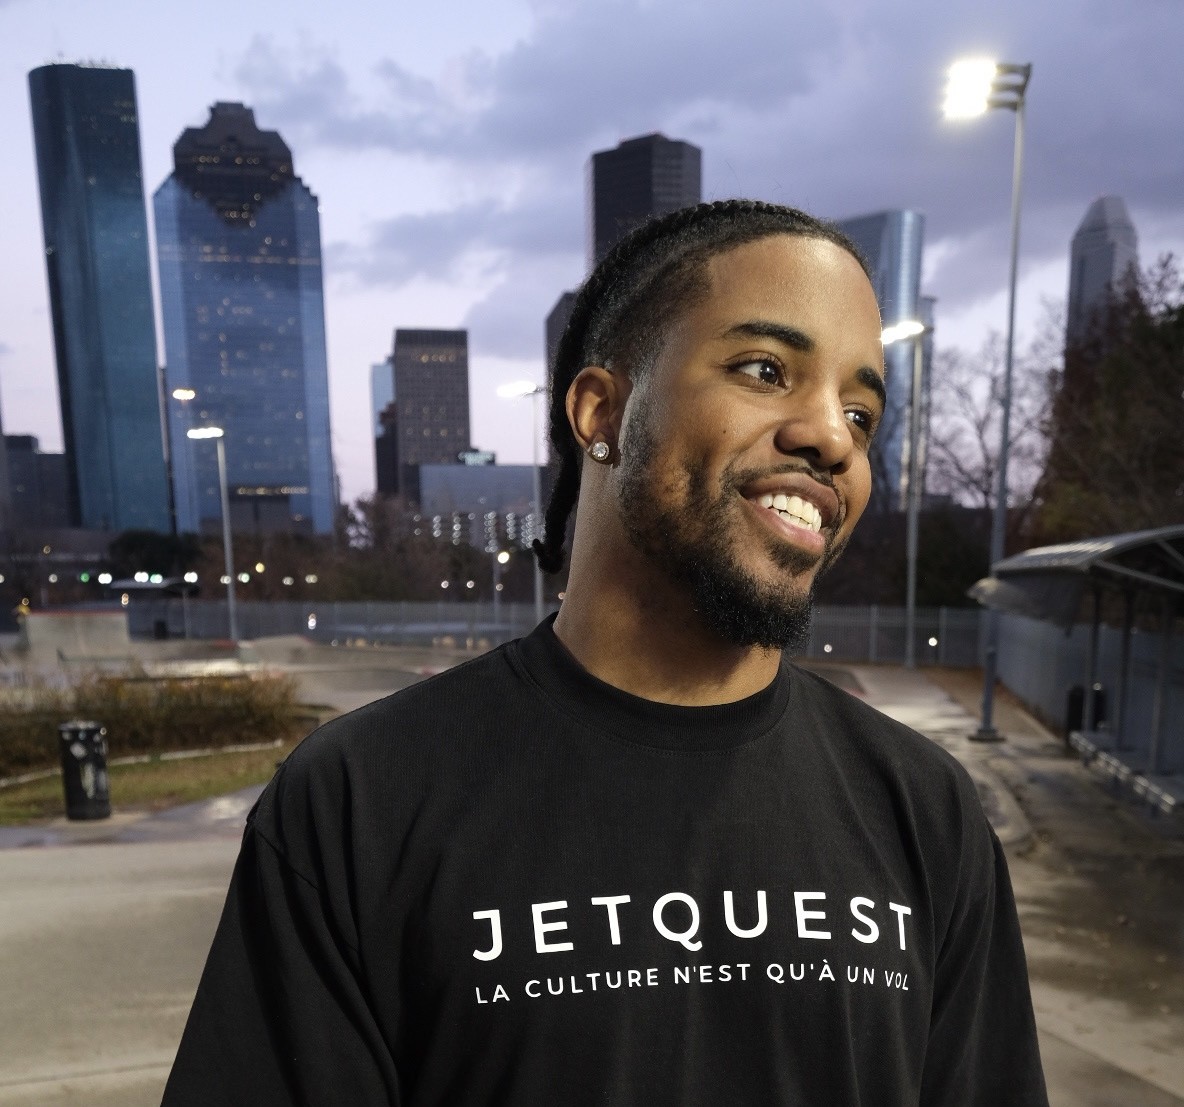 Photo of JetQuest founder Jonathon Lewis modeling the JetQuest Clothing line